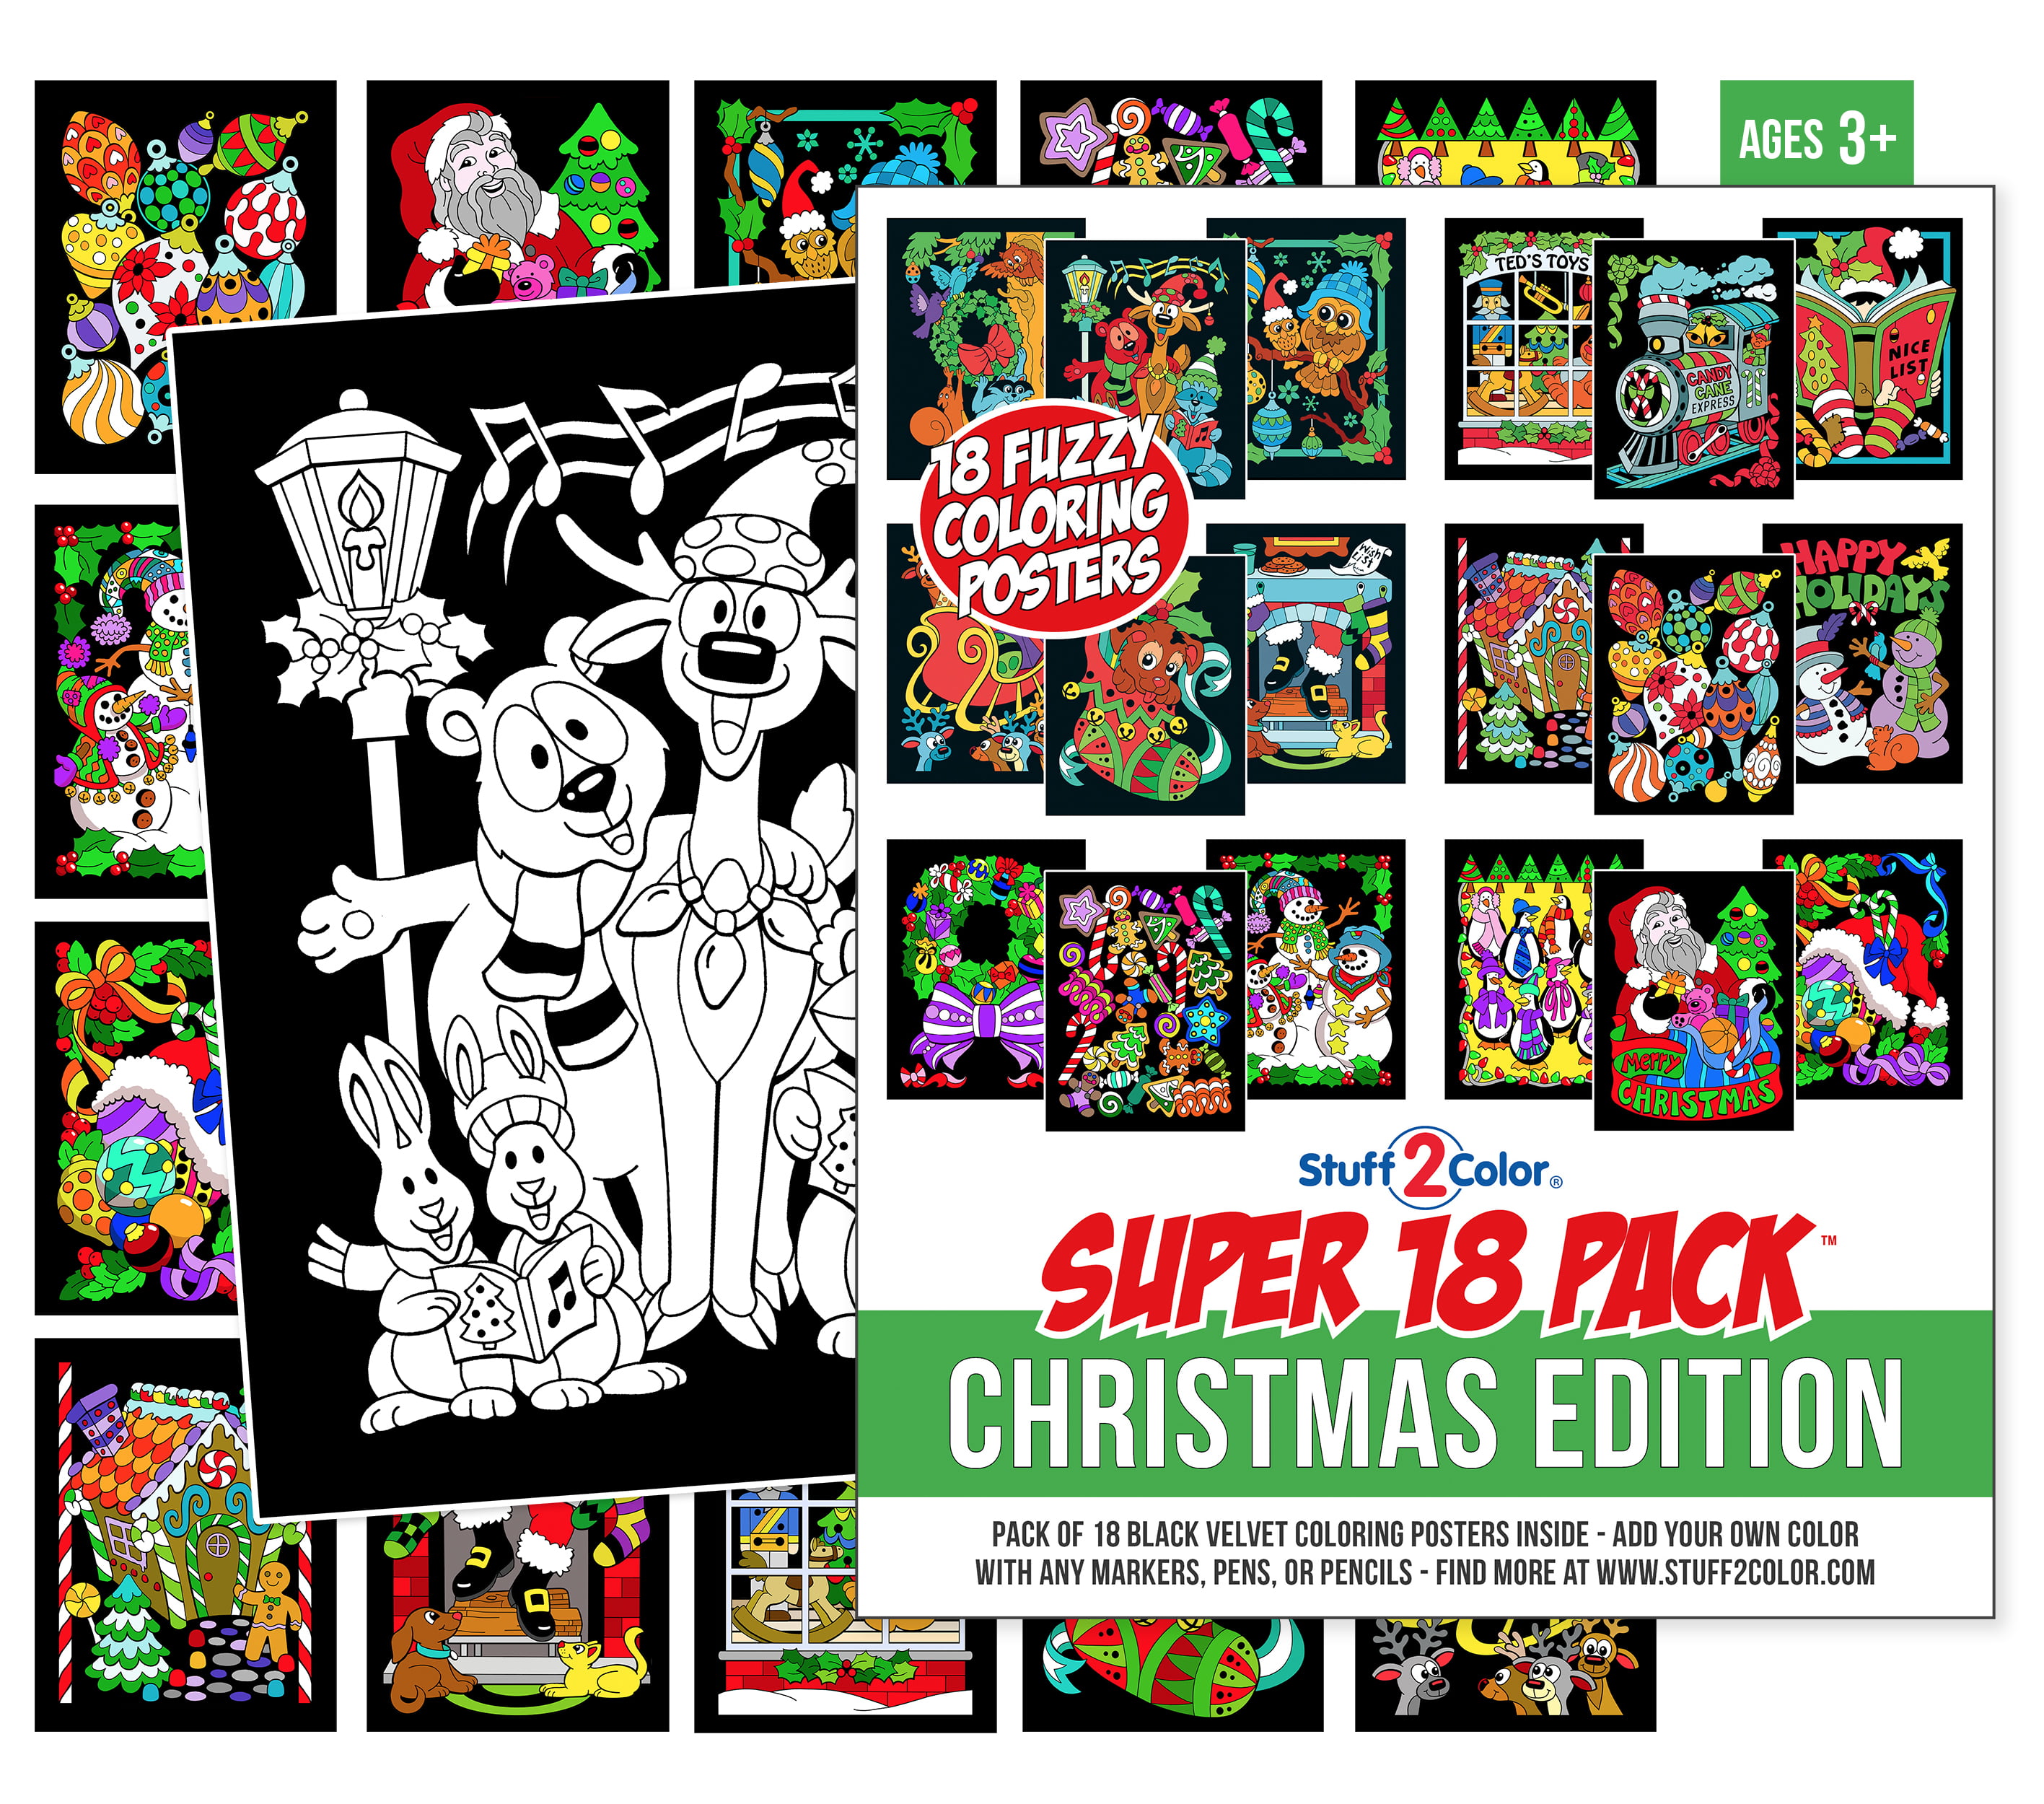 Super+Pack+of+18+Fuzzy+Velvet+Coloring+Posters+%28Decades+Edition%29+-+Stuff2Color  for sale online